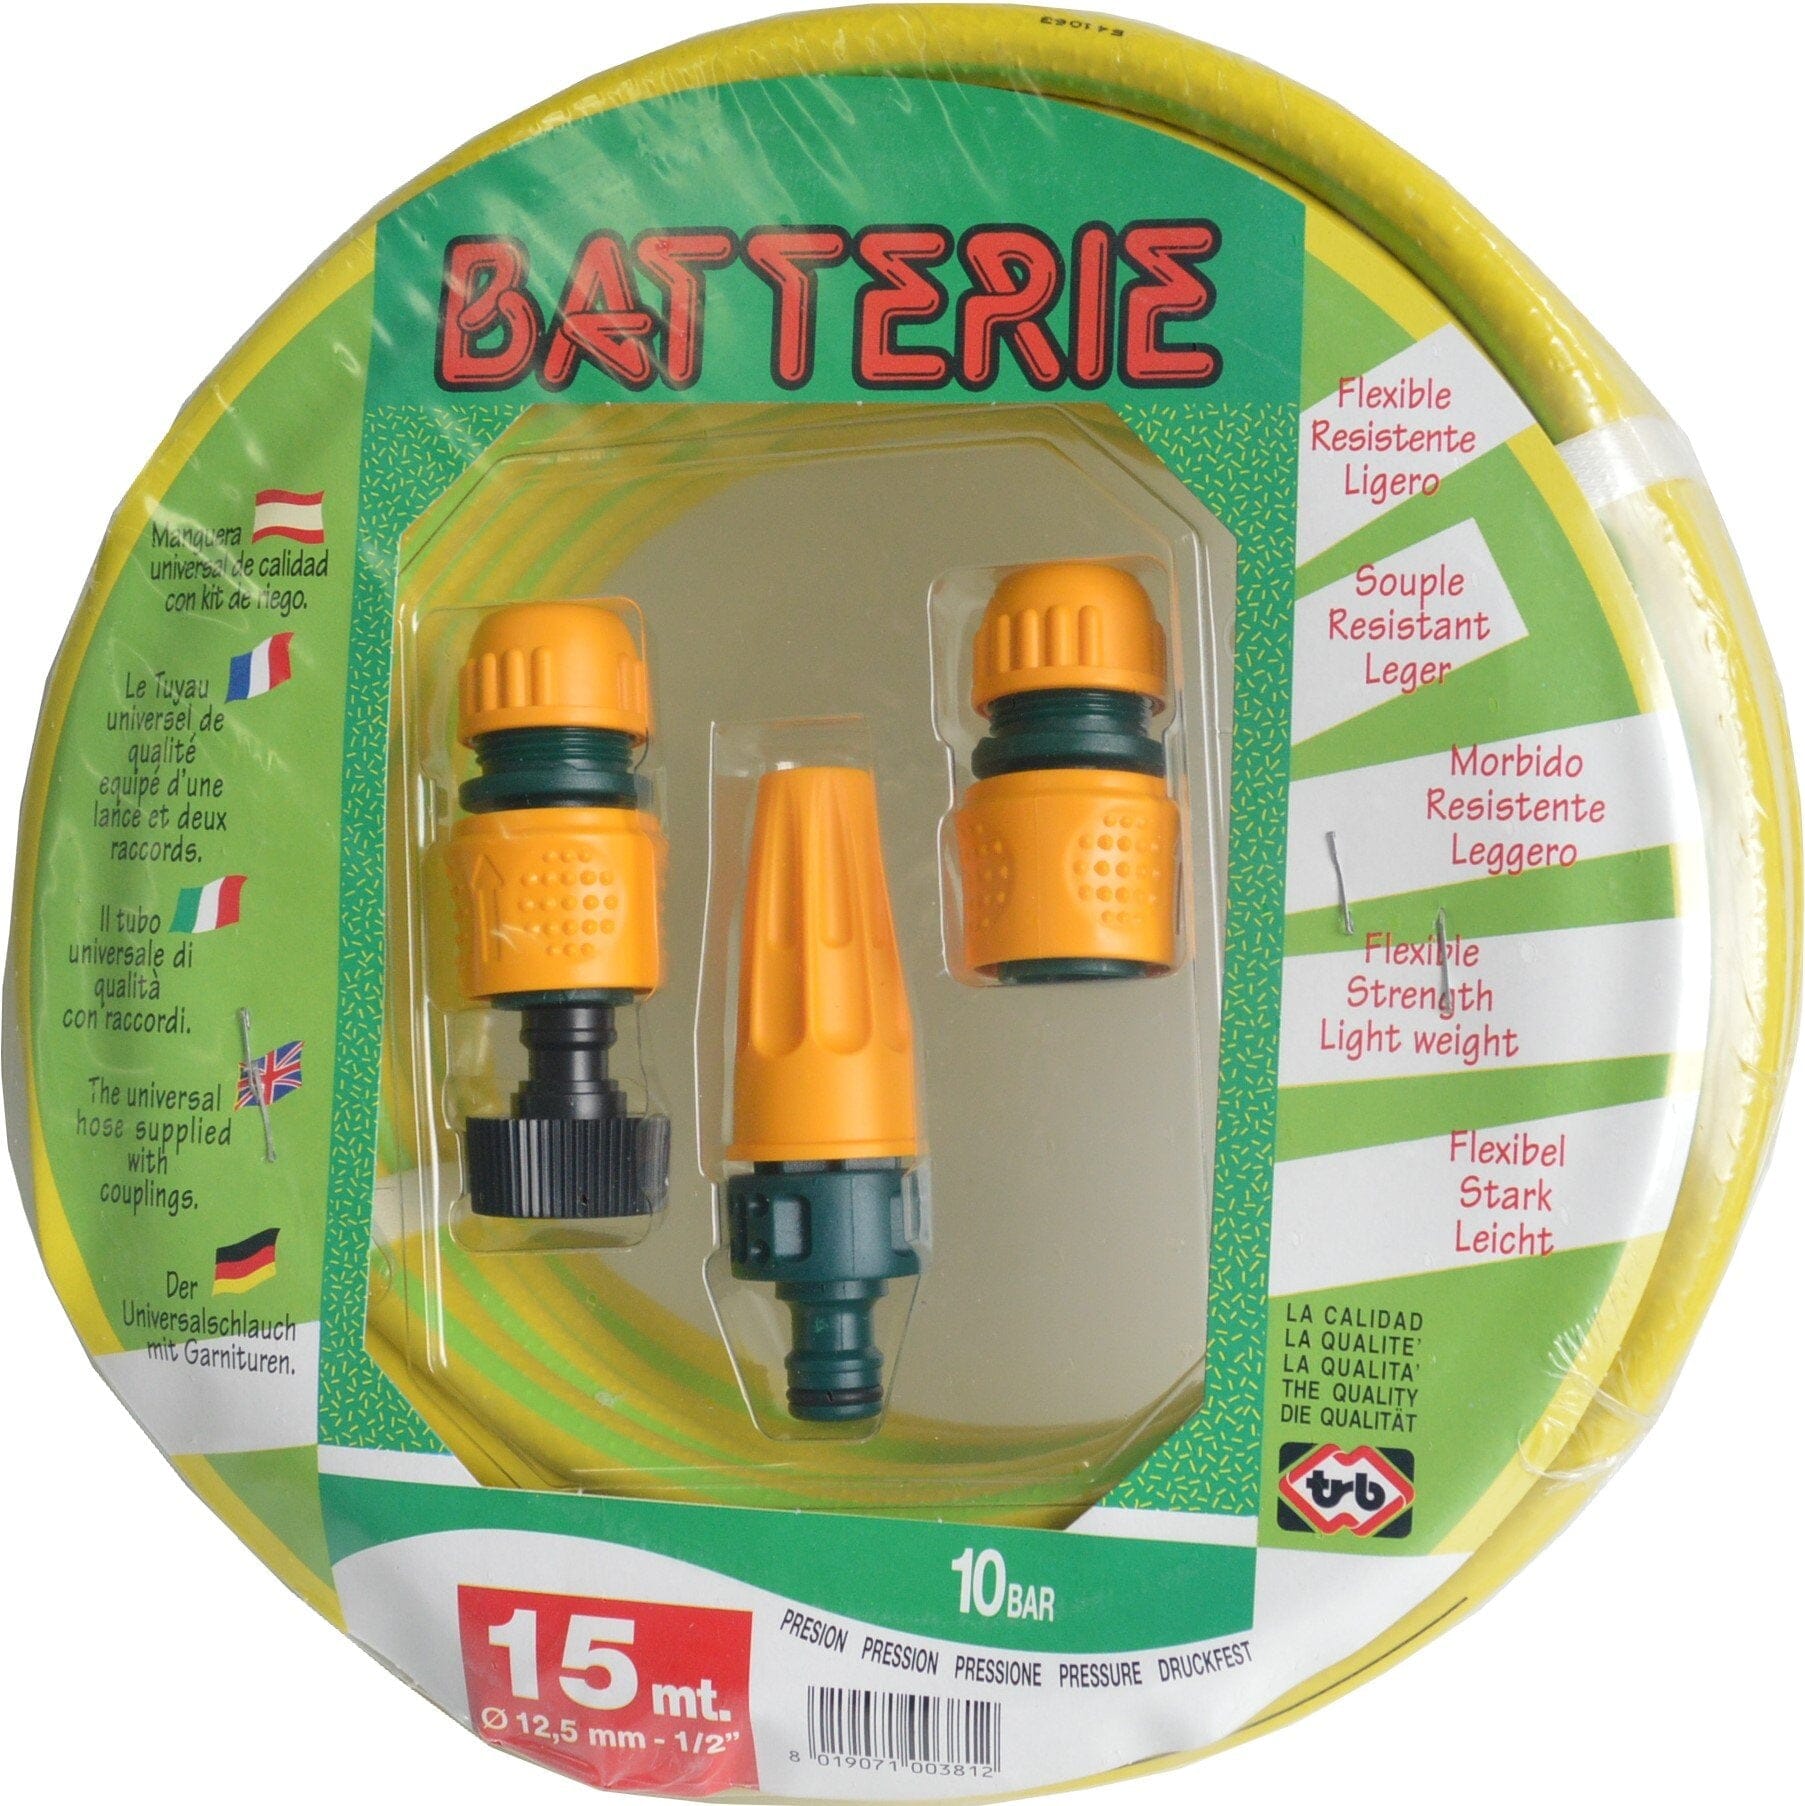 Adflex Plastic Garden Hose with Fittings 12mm x 15m Batterie